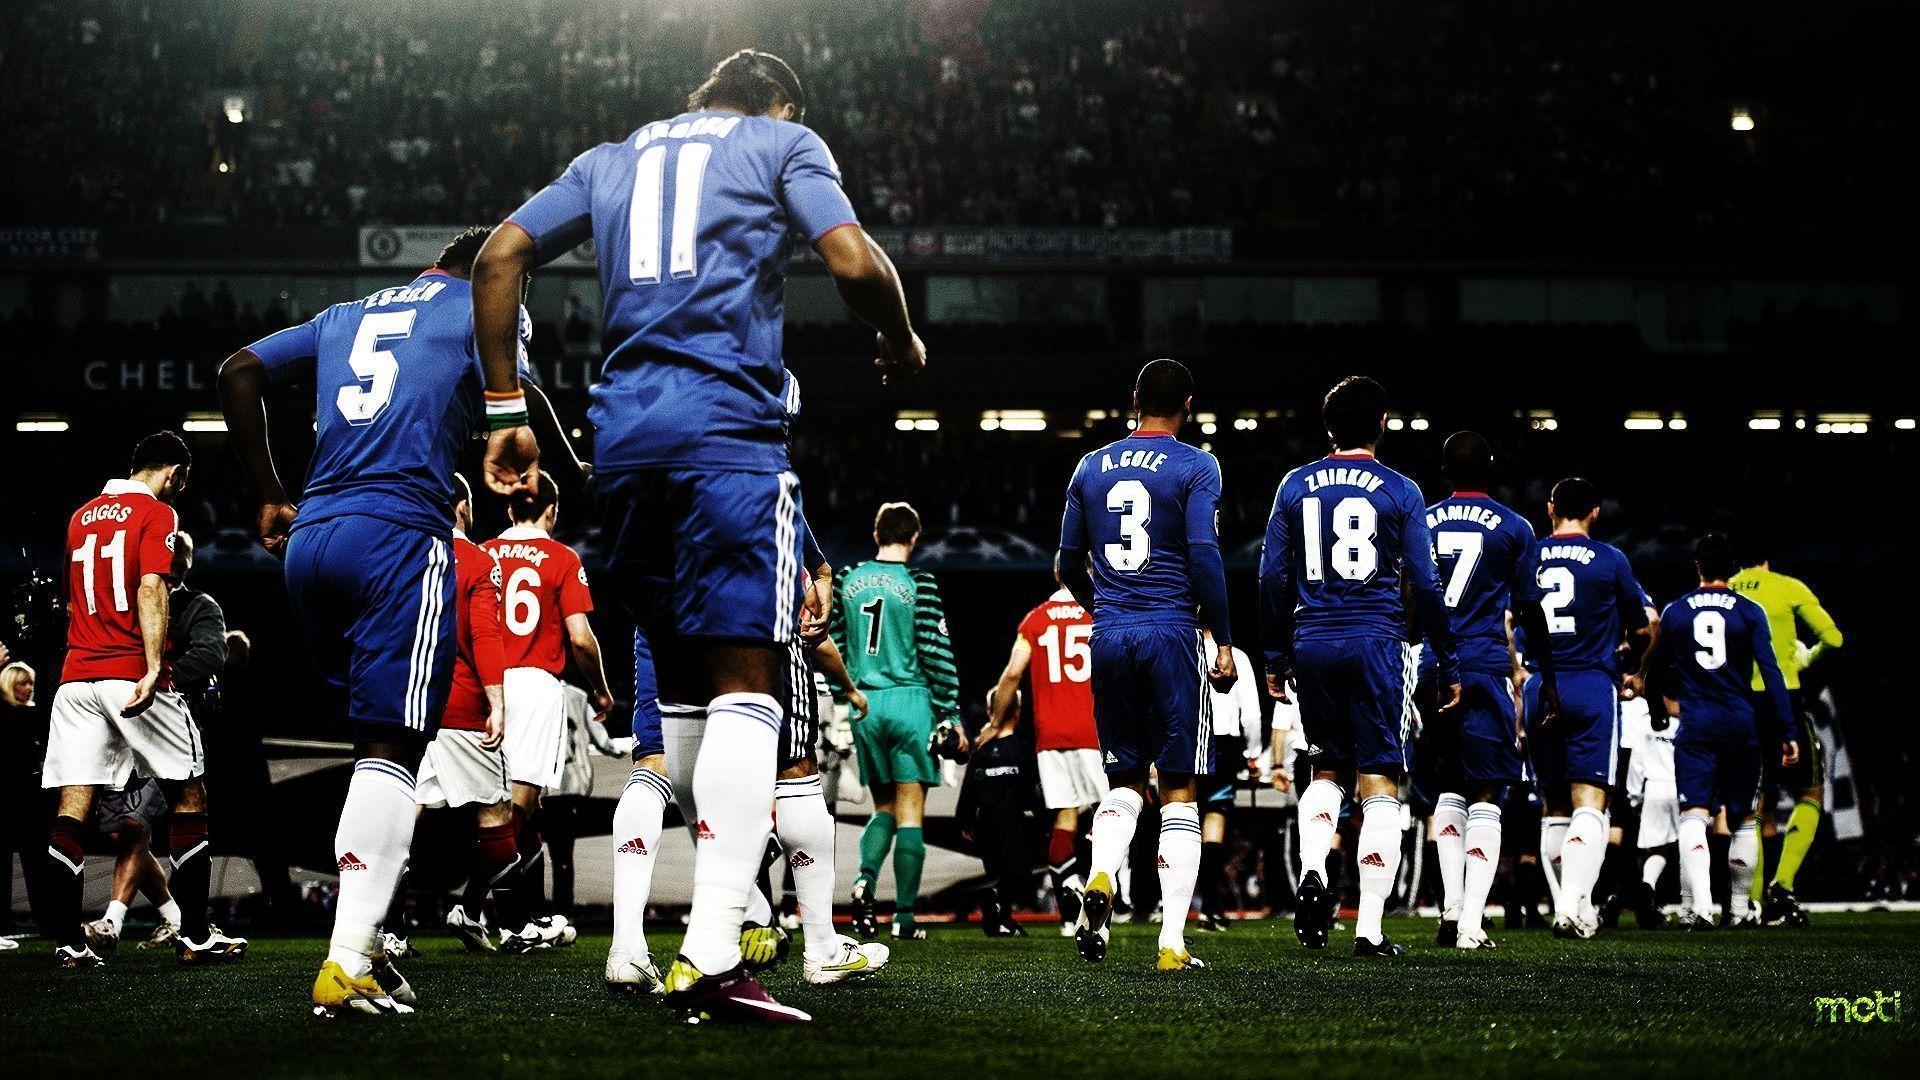 Wallpaper chelsea, manchester united, champions league, drogba